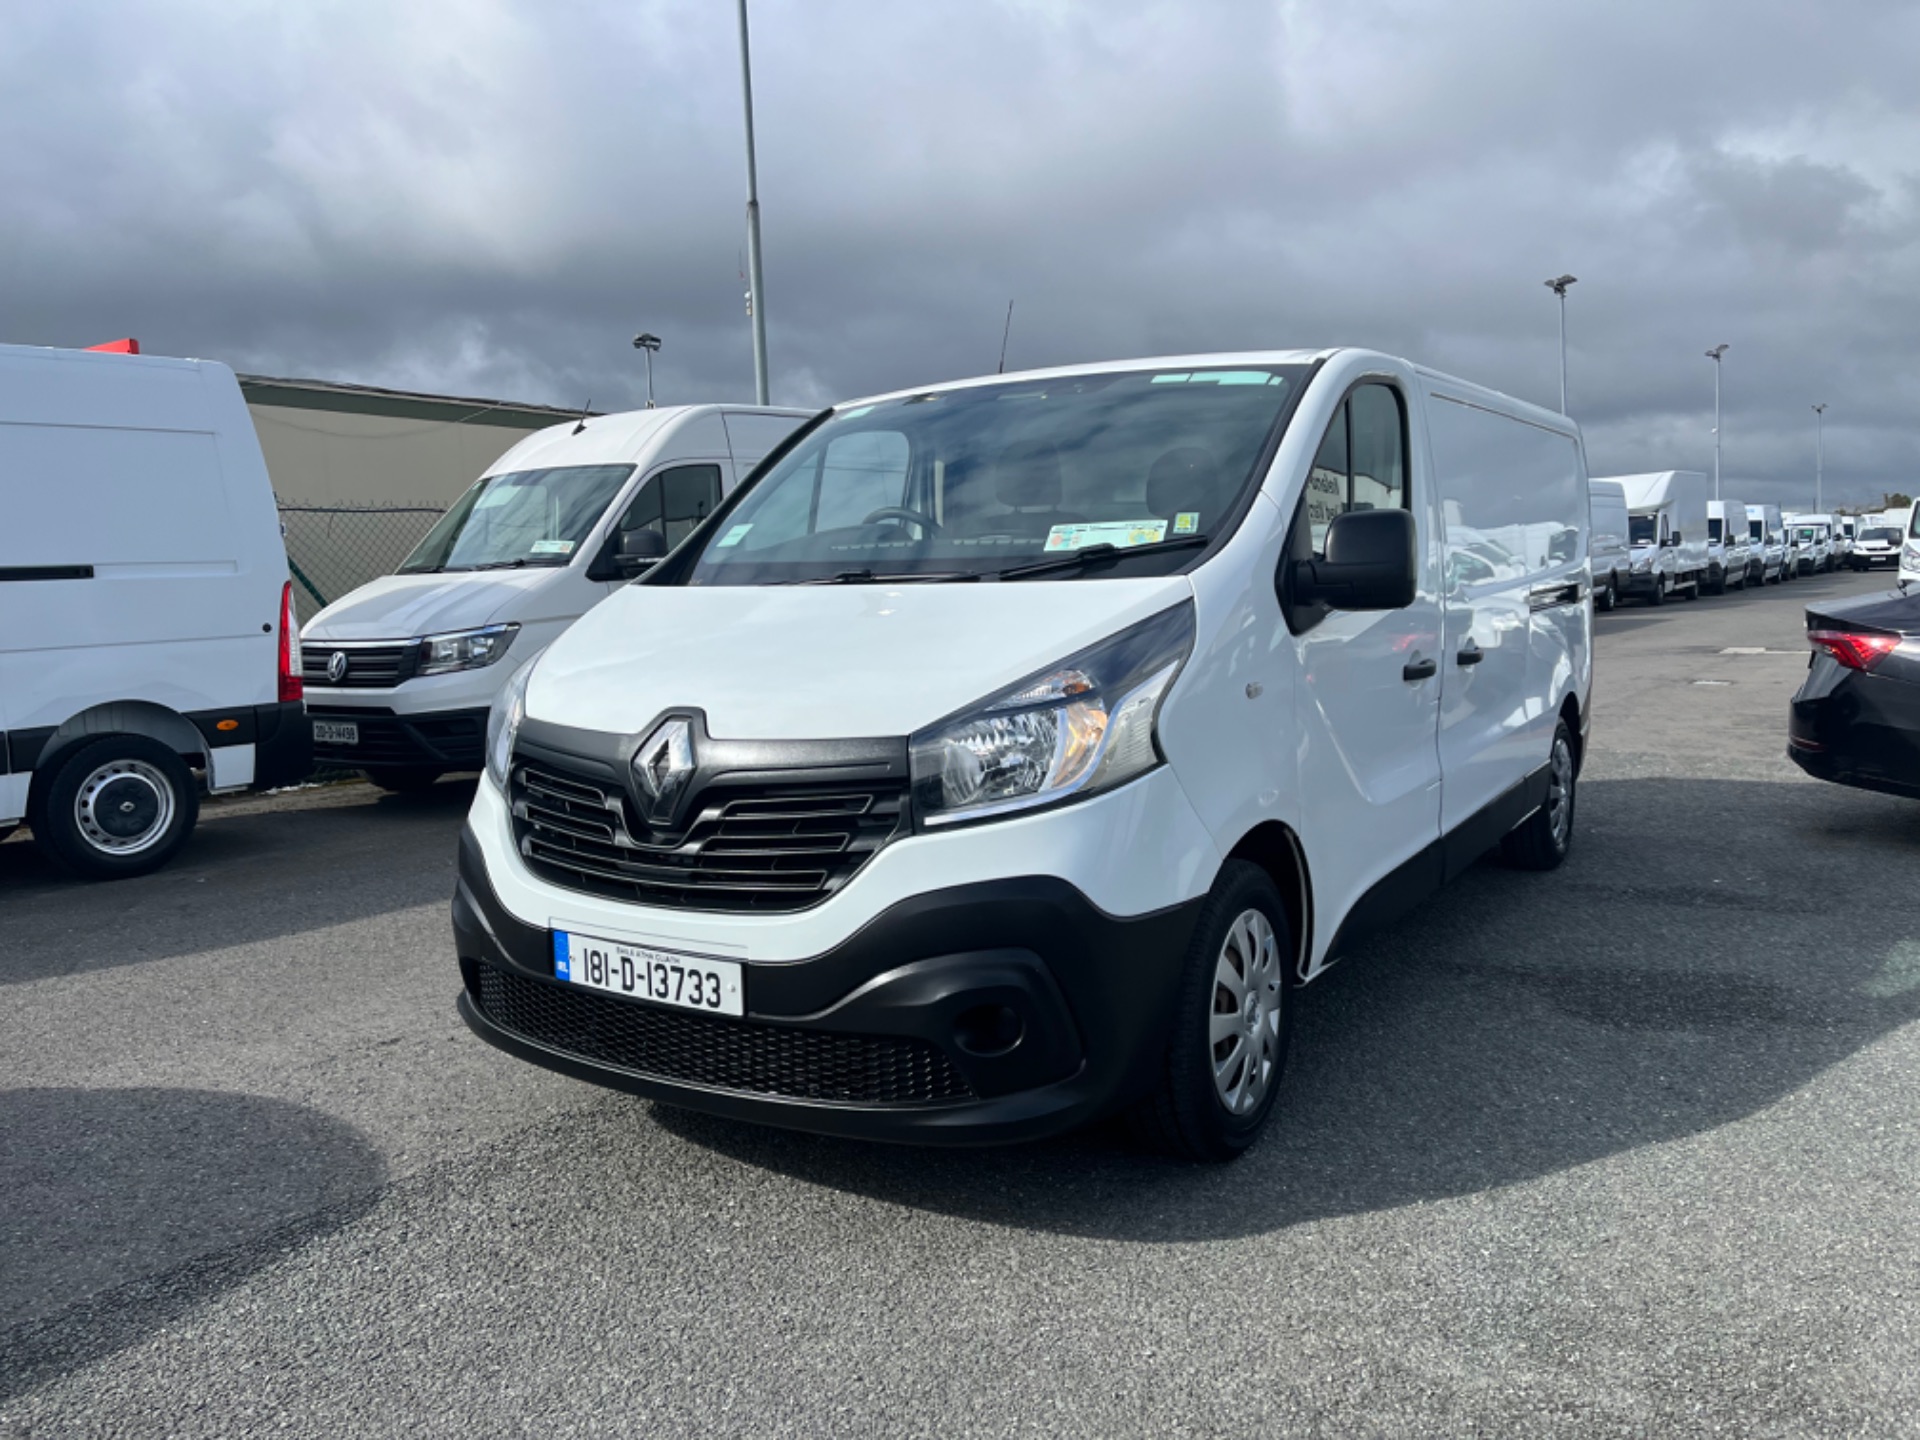 2018 Renault Trafic LL29 DCI 120 Business 3DR (181D13733) Image 3